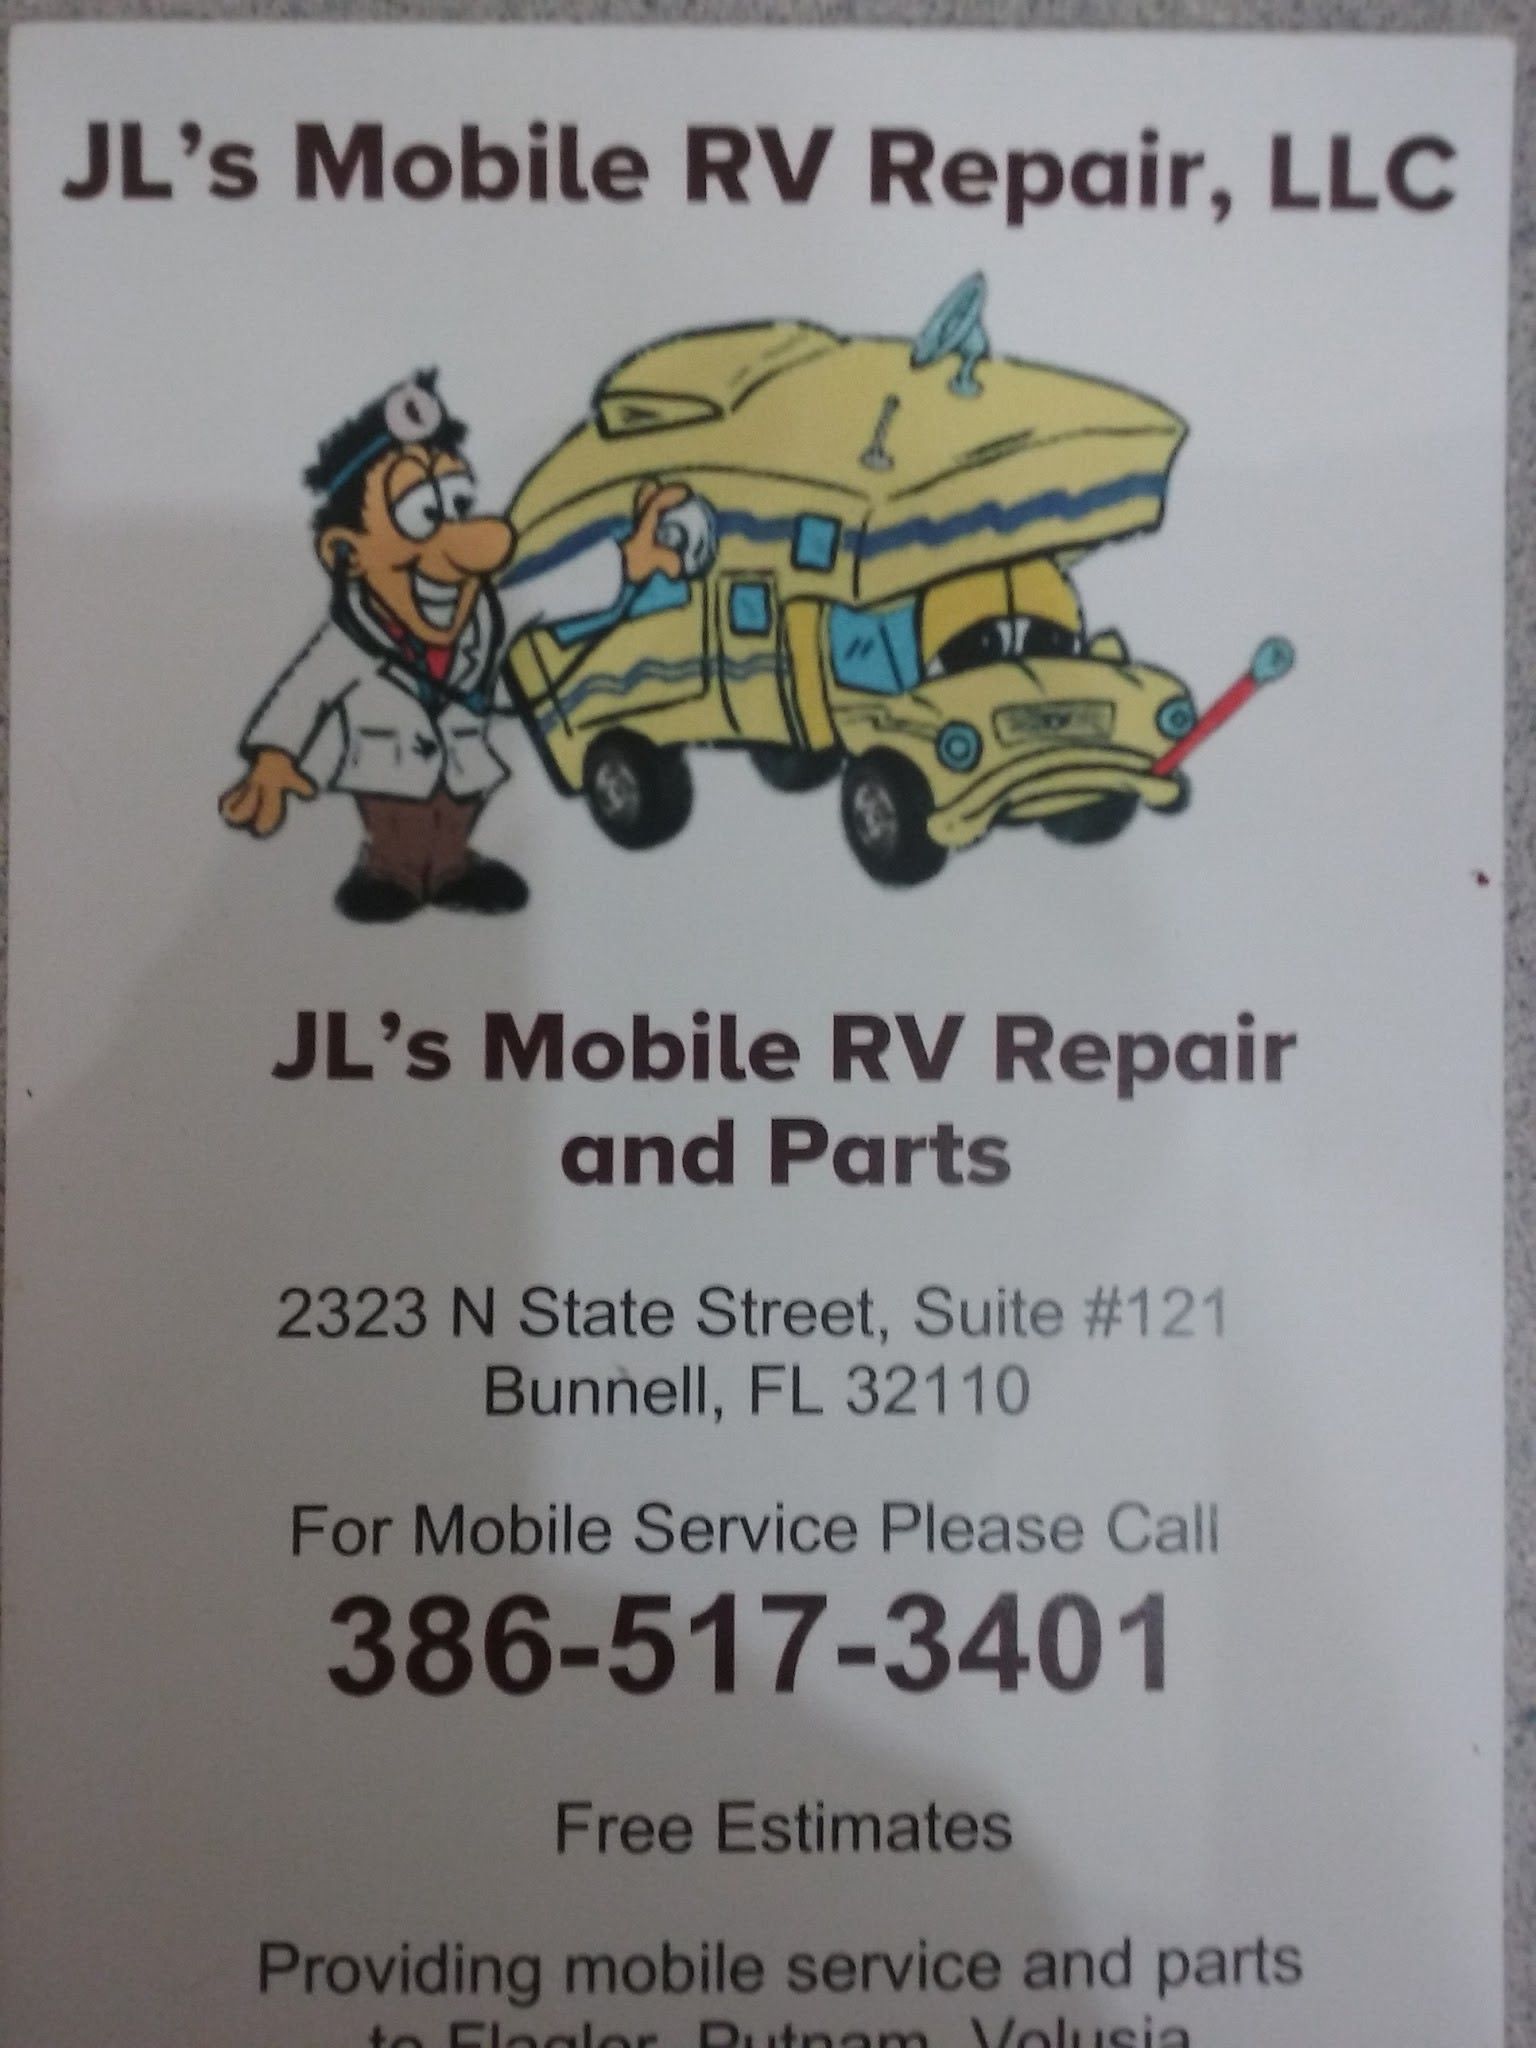 Services & Products JL's Mobile RV Repair in Bunnell FL